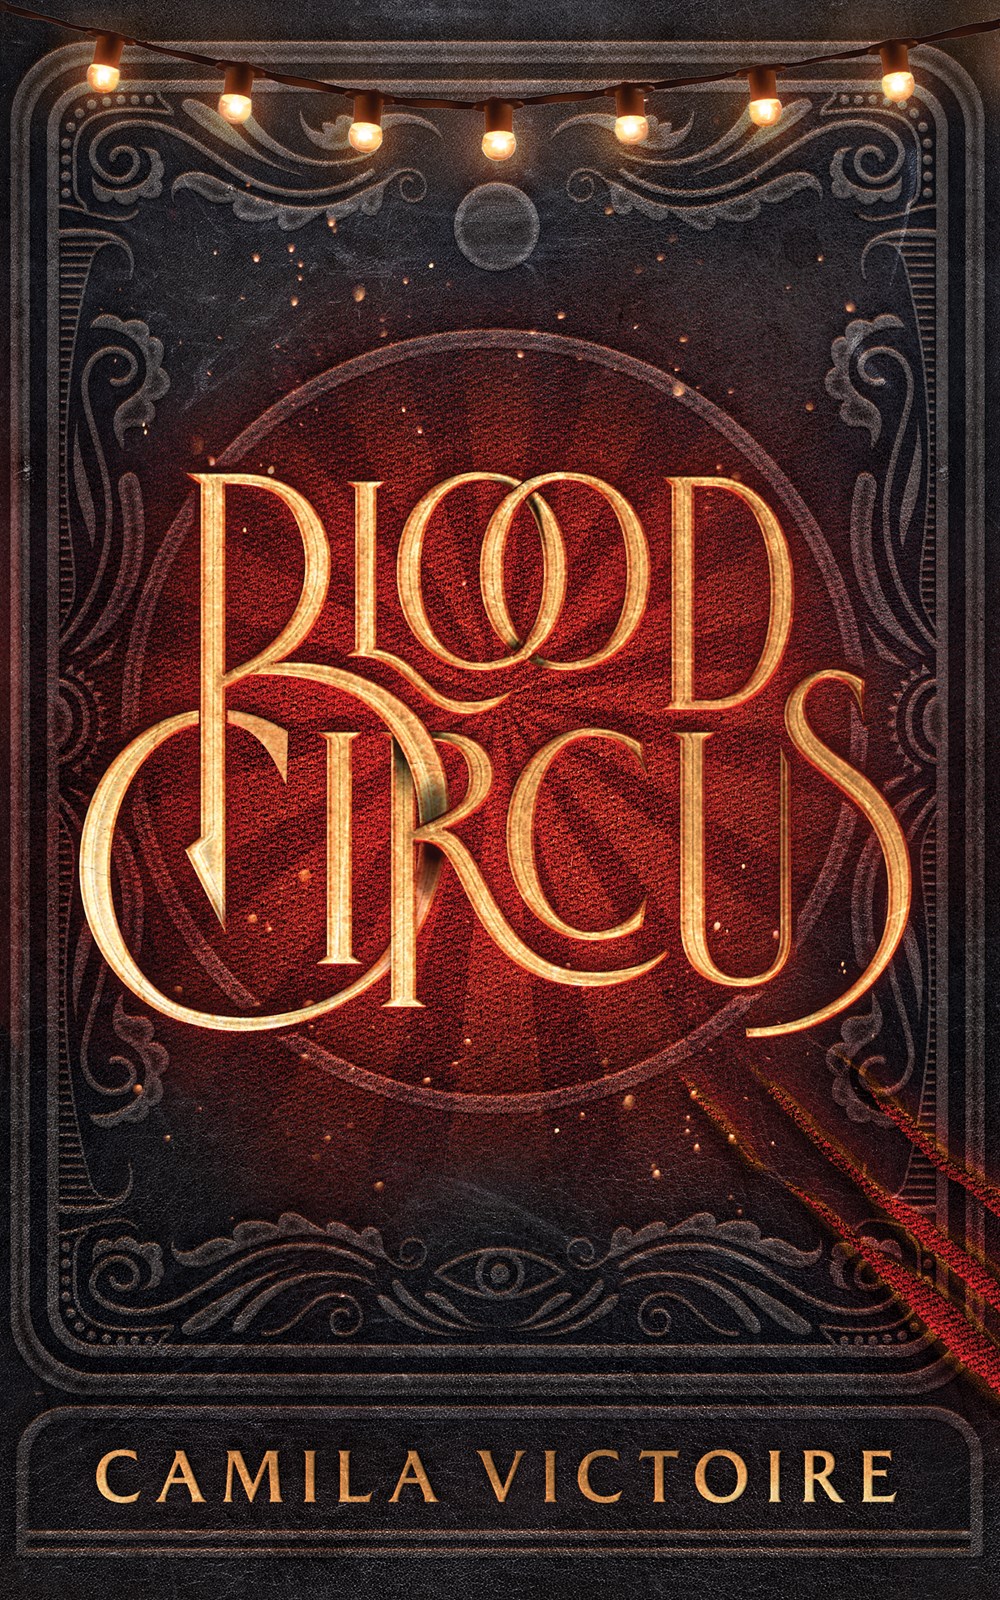 Blood Cicus cover image